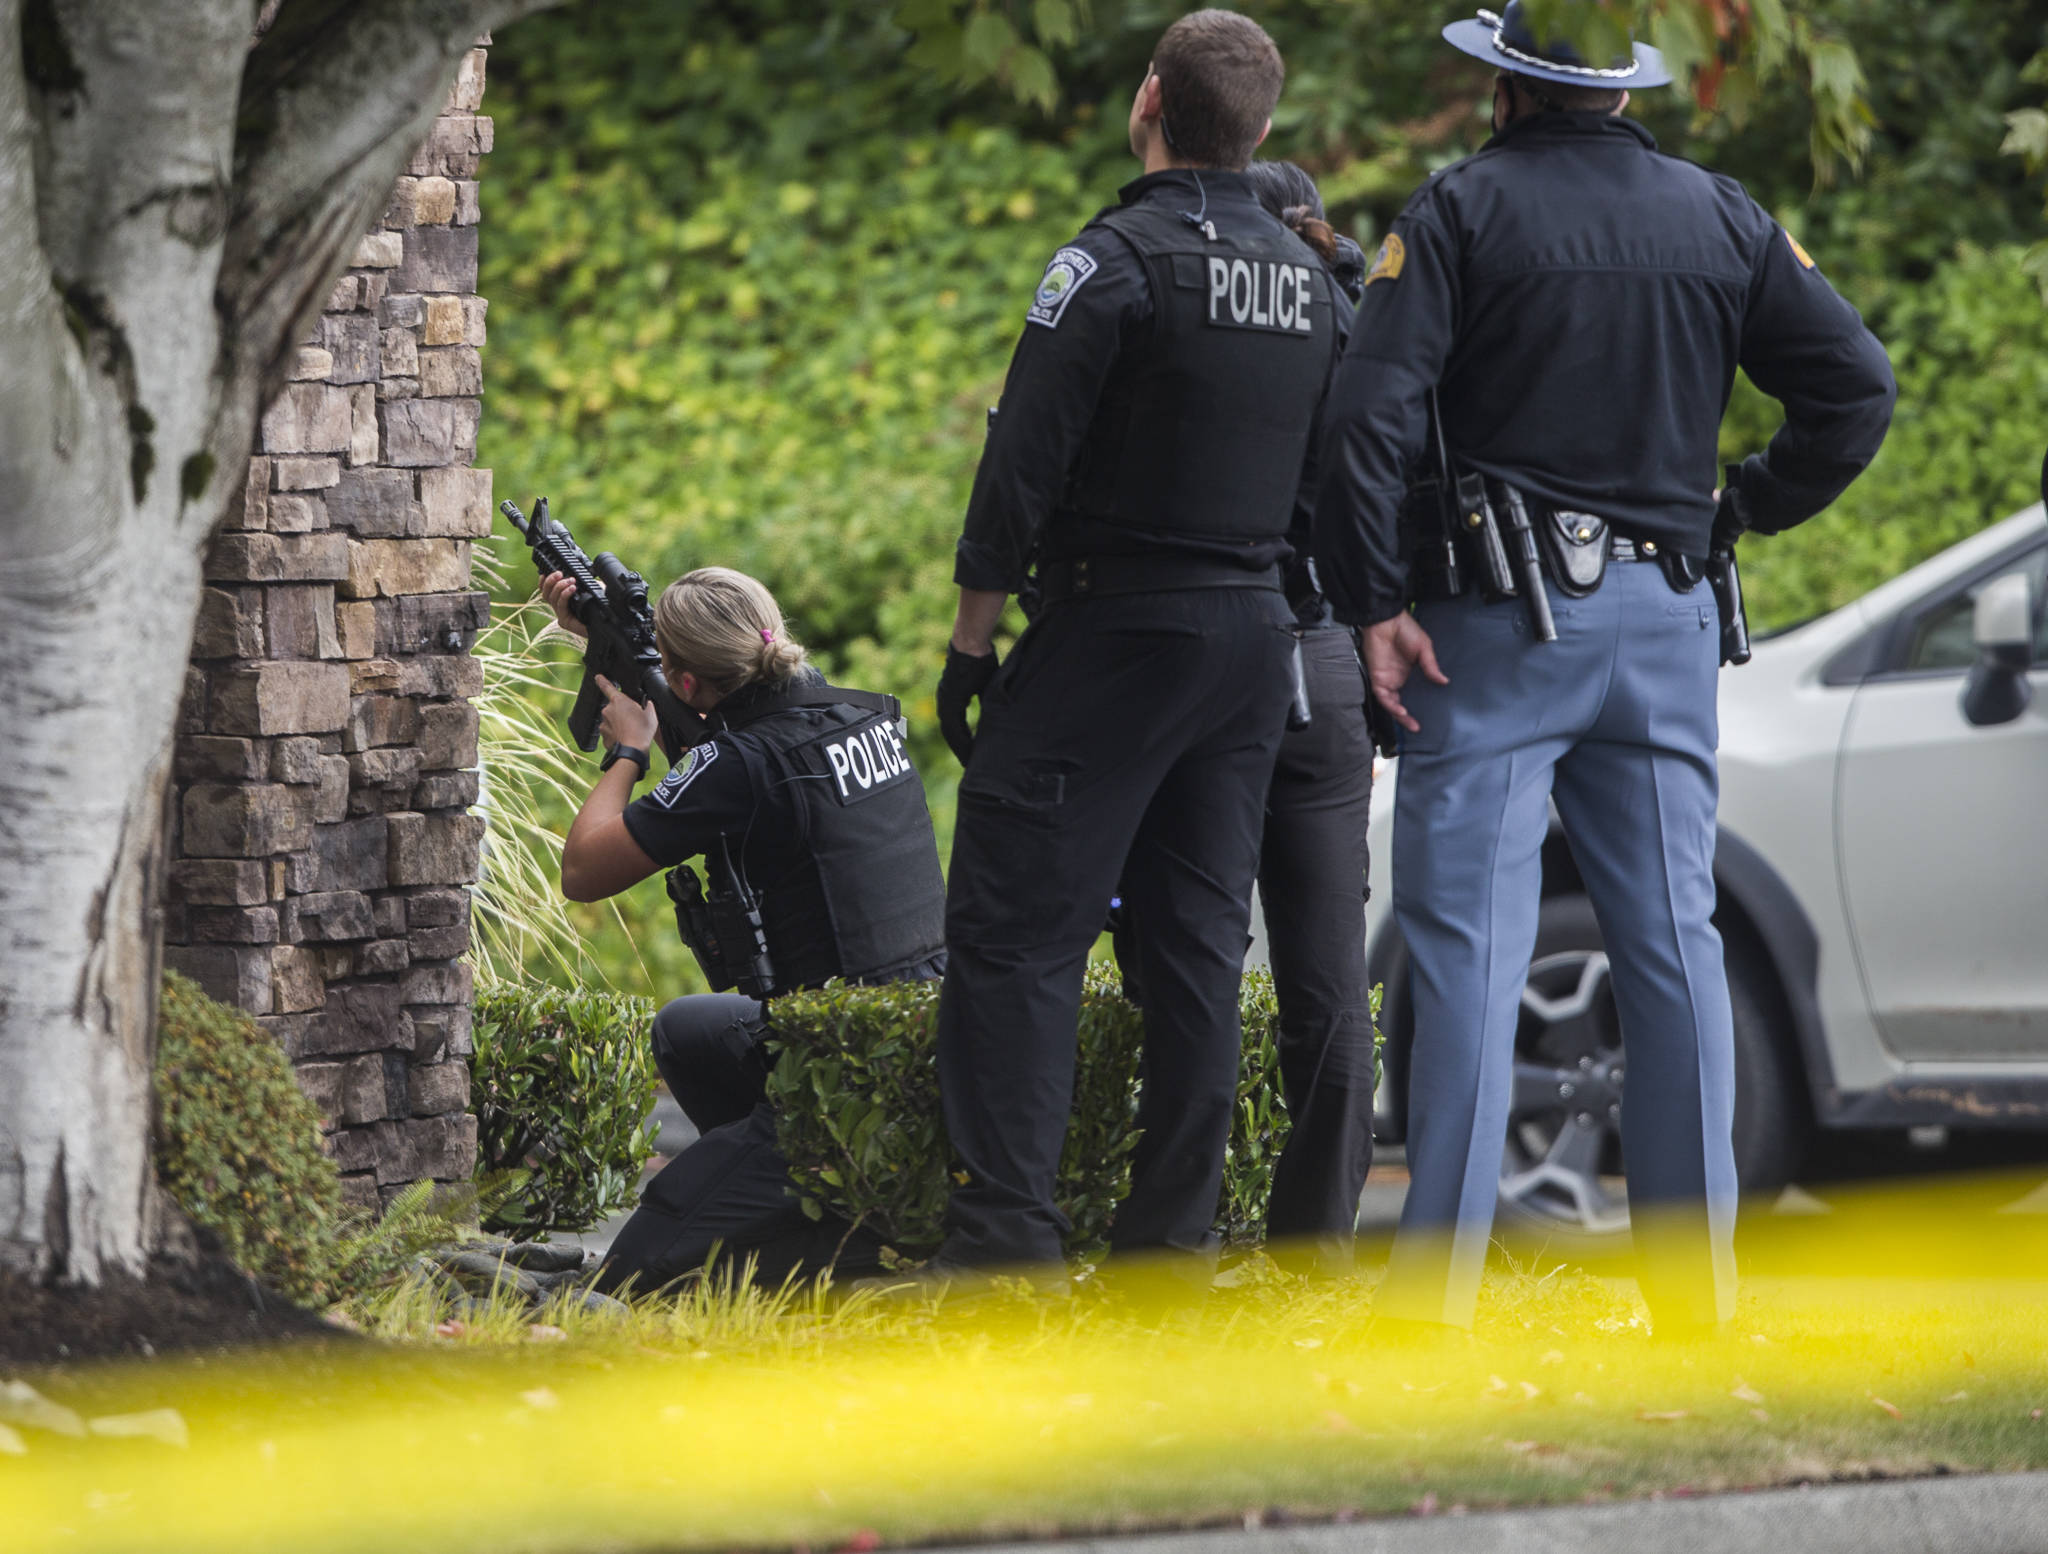 A police officer looks through a scope at a carjacking suspect on Wednesday near Mill Creek. (Olivia Vanni / The Herald)